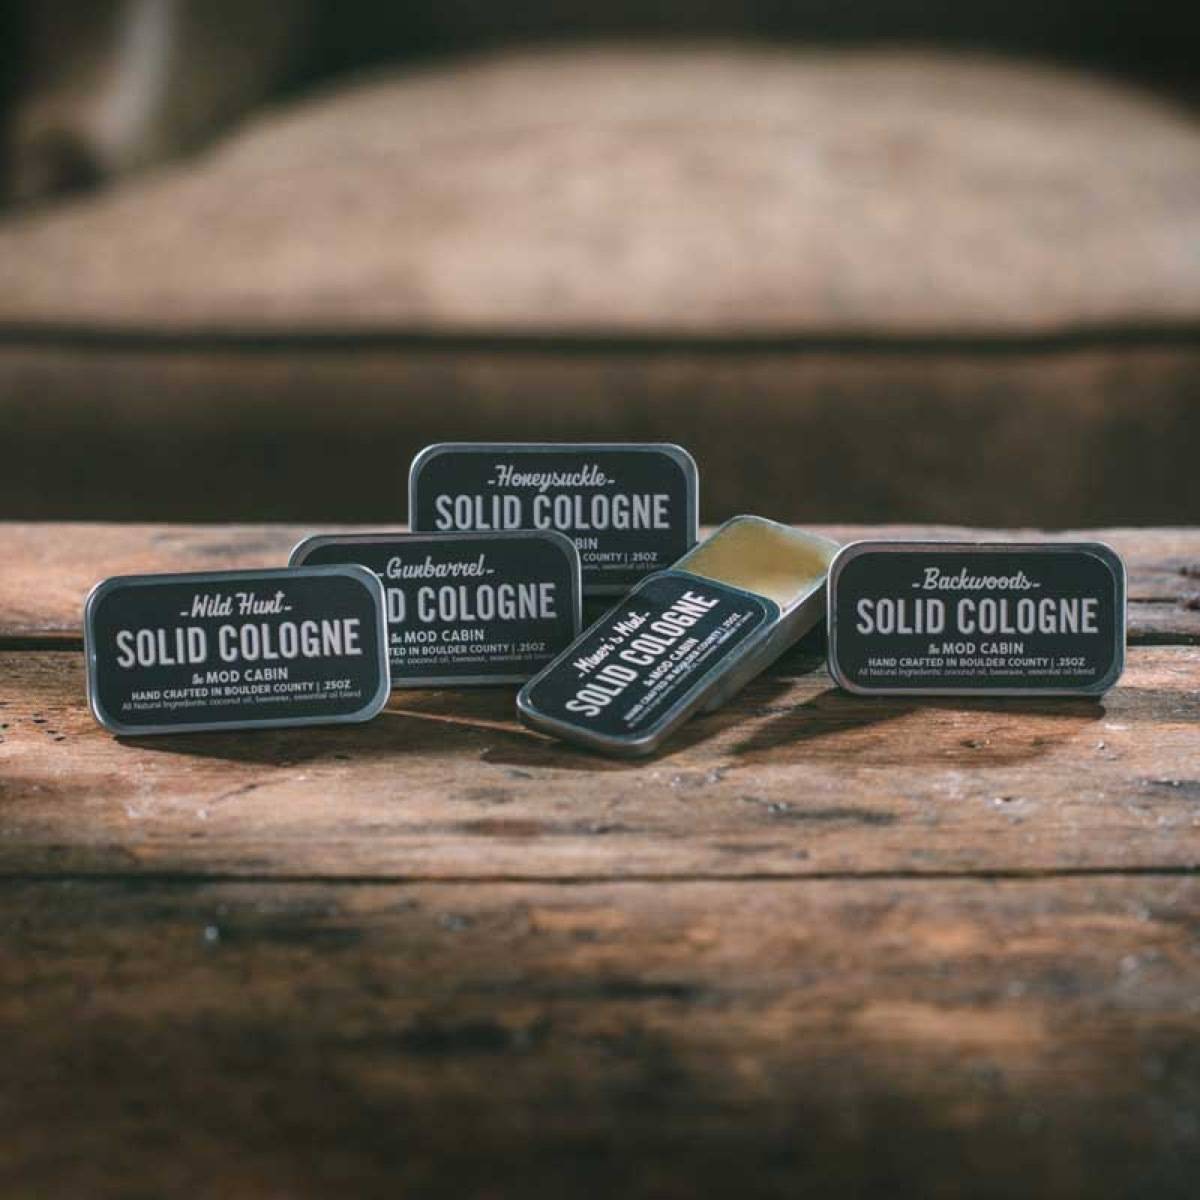 Solid cologne